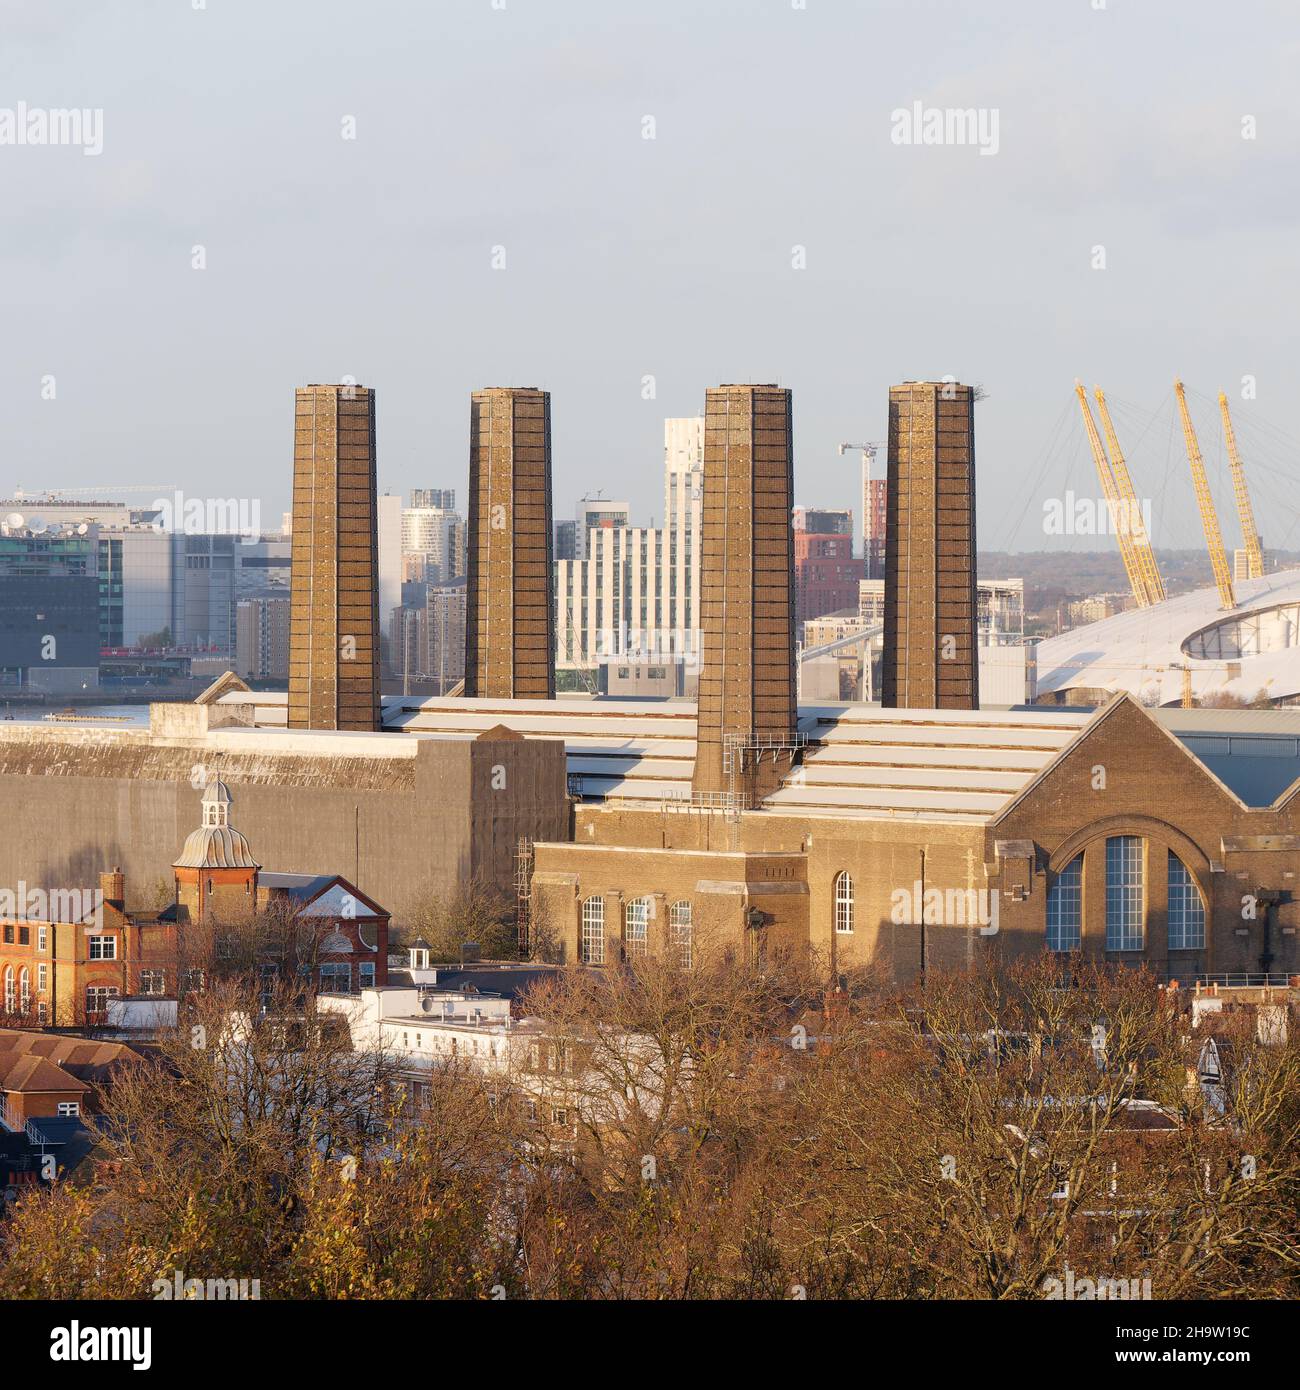 London, Greater London, England, December 04 2021: Building with four distinctive chimneys in Greenwich with the O2 building behind. Stock Photo